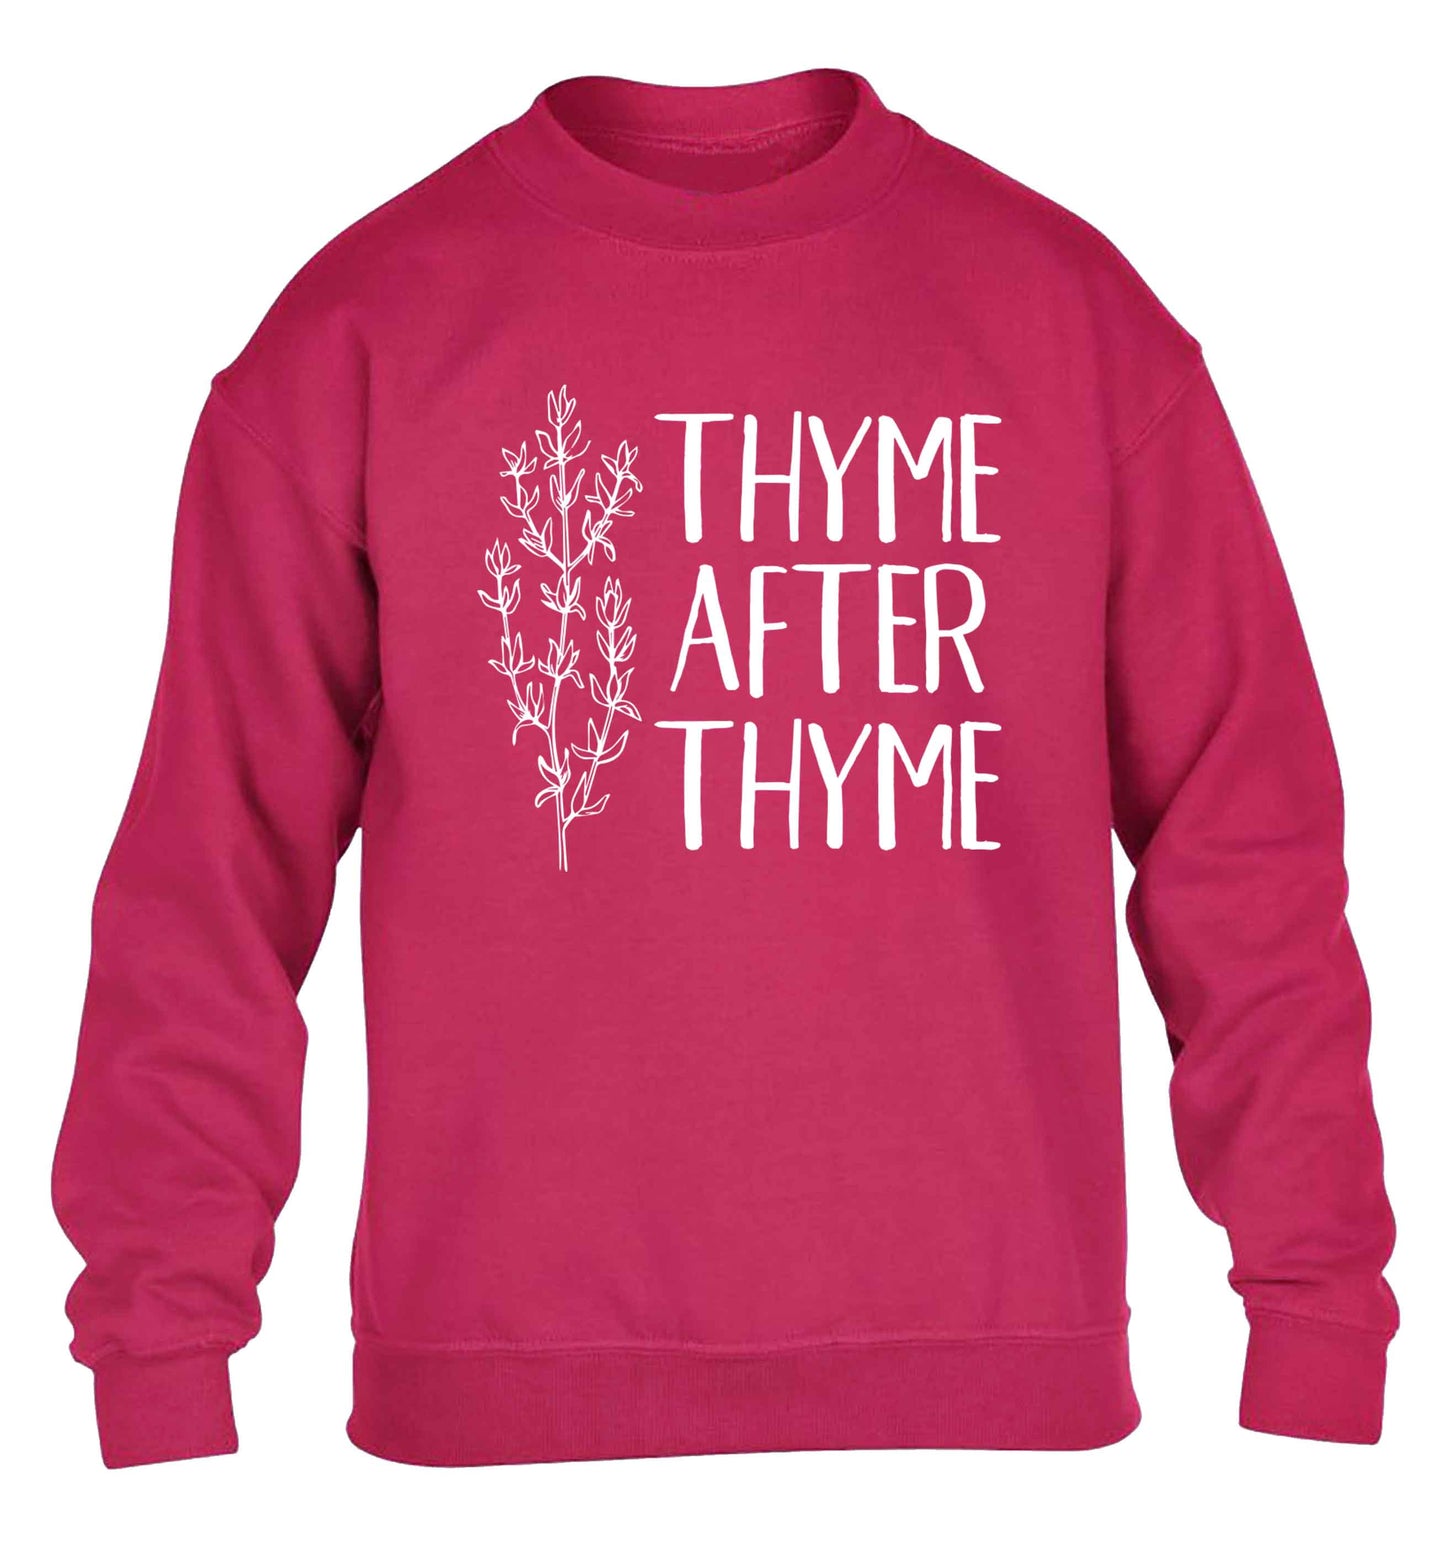 Thyme after thyme children's pink sweater 12-13 Years